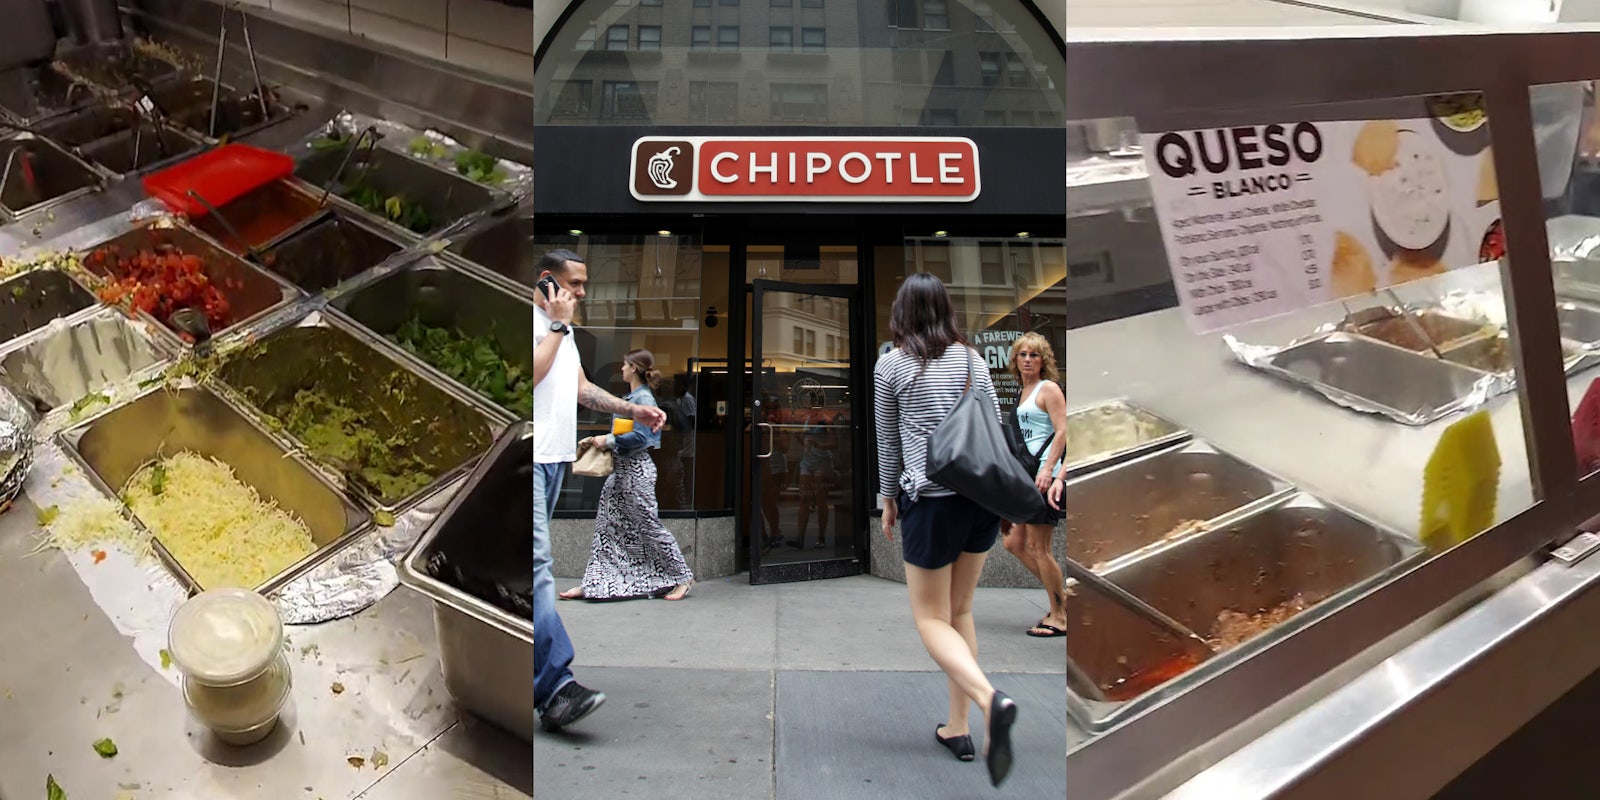 Chipotle ingredients in metal containers (l) Chipotle restaurant with sing in city with people walking (c) Chipotle counter with ingredients low in stock in metal containers (r)